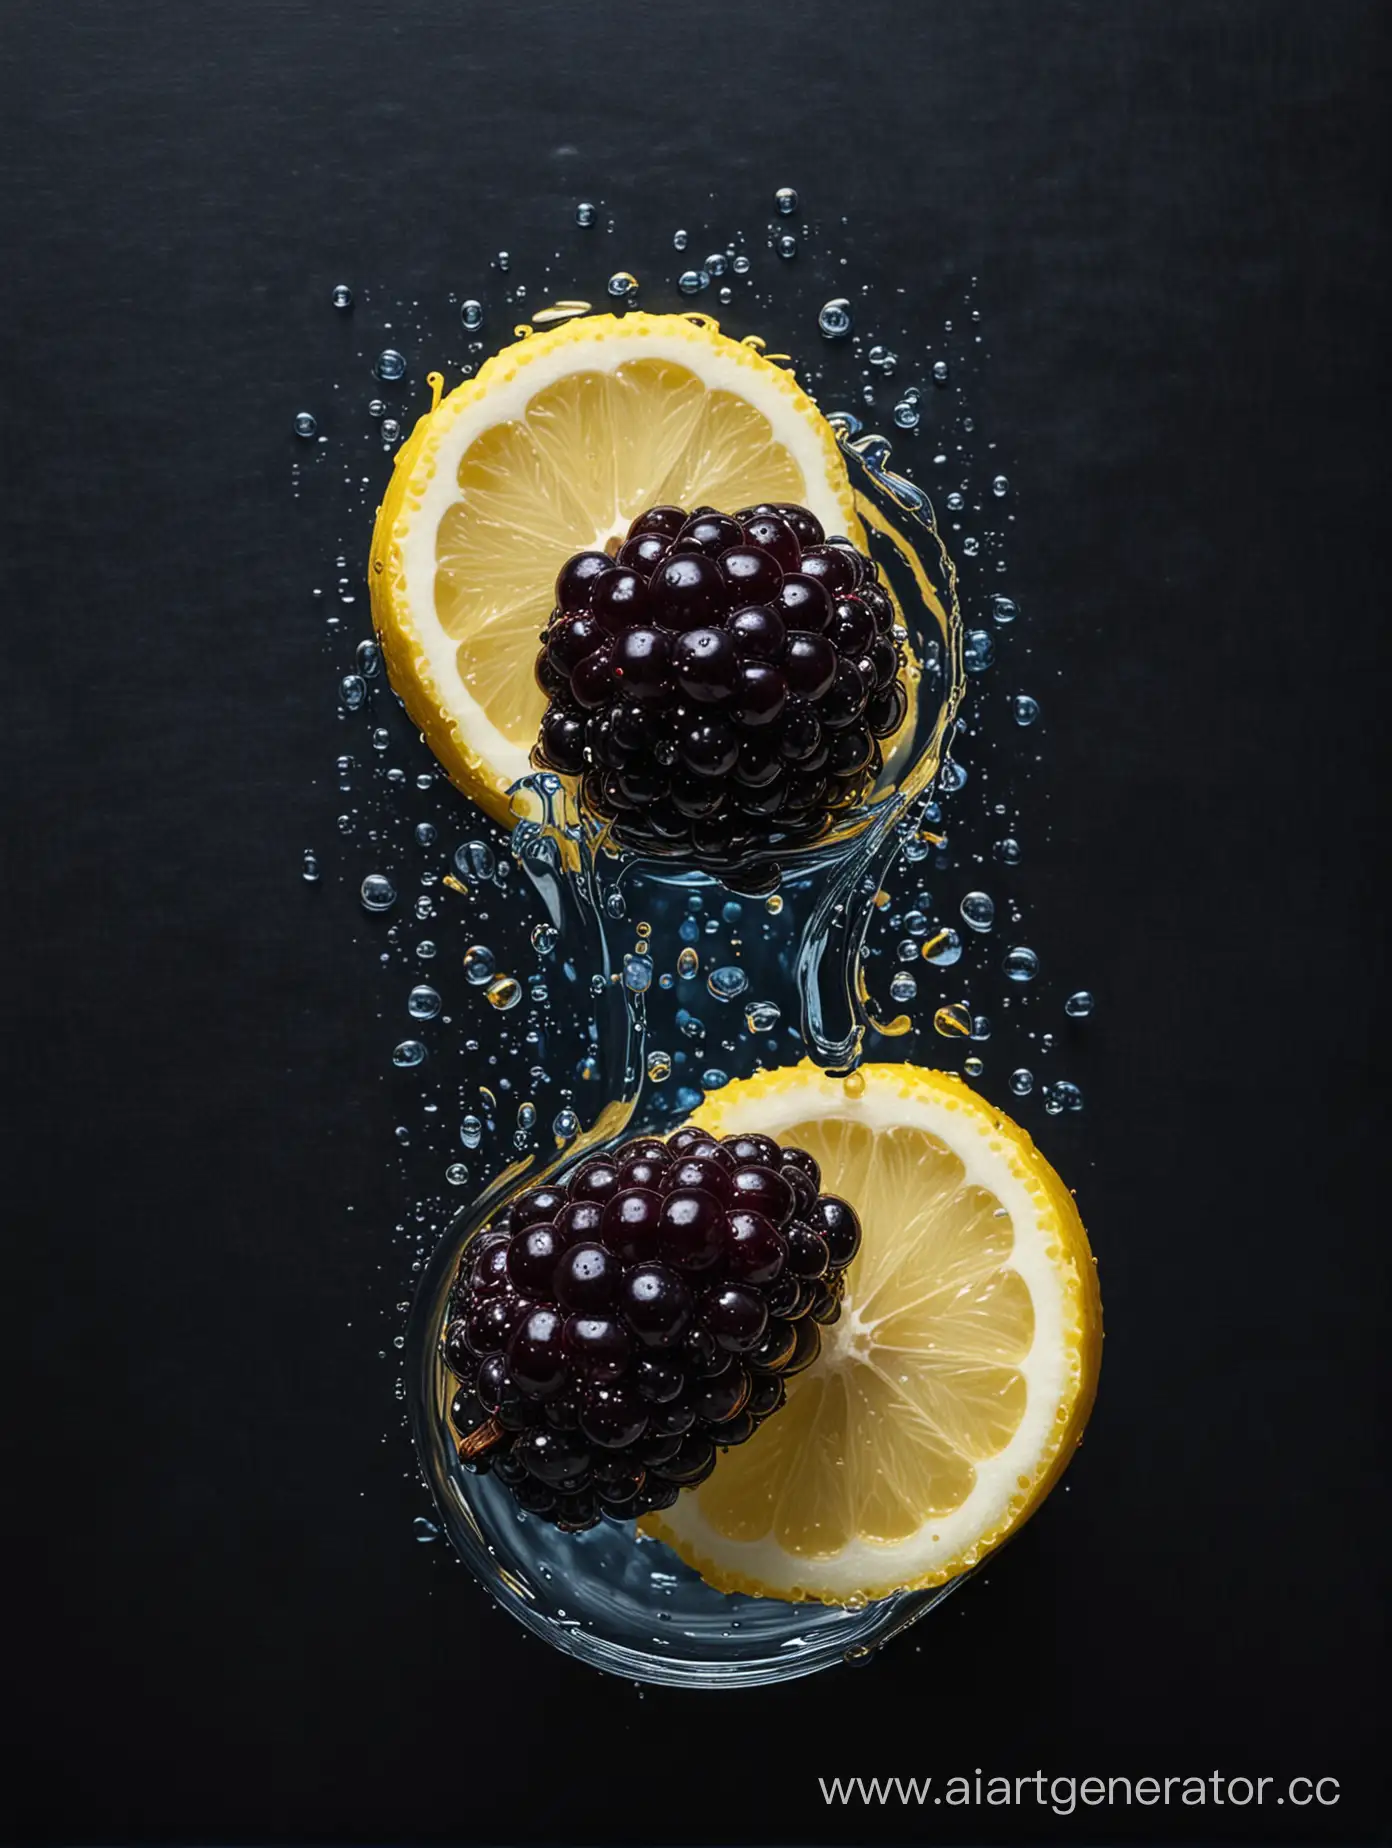 Vibrant-Boysenberry-and-Lemon-Slices-Water-Droplets-on-Dark-Blue-Background